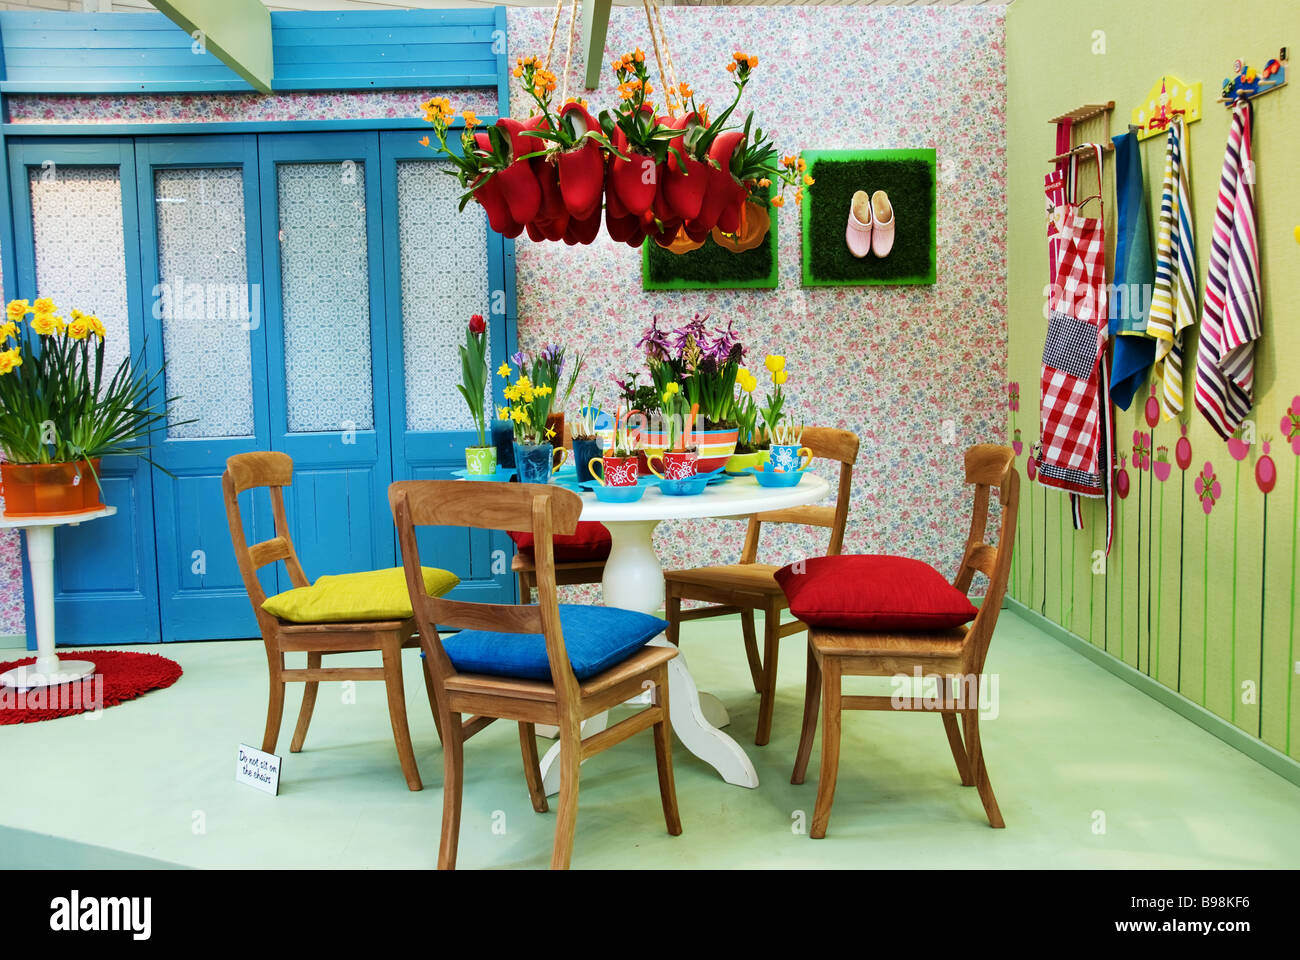 A brightly coloured room is decorated for display in traditional Dutch style at Keukenhof Gardens in Lisse, The Netherlands Stock Photo